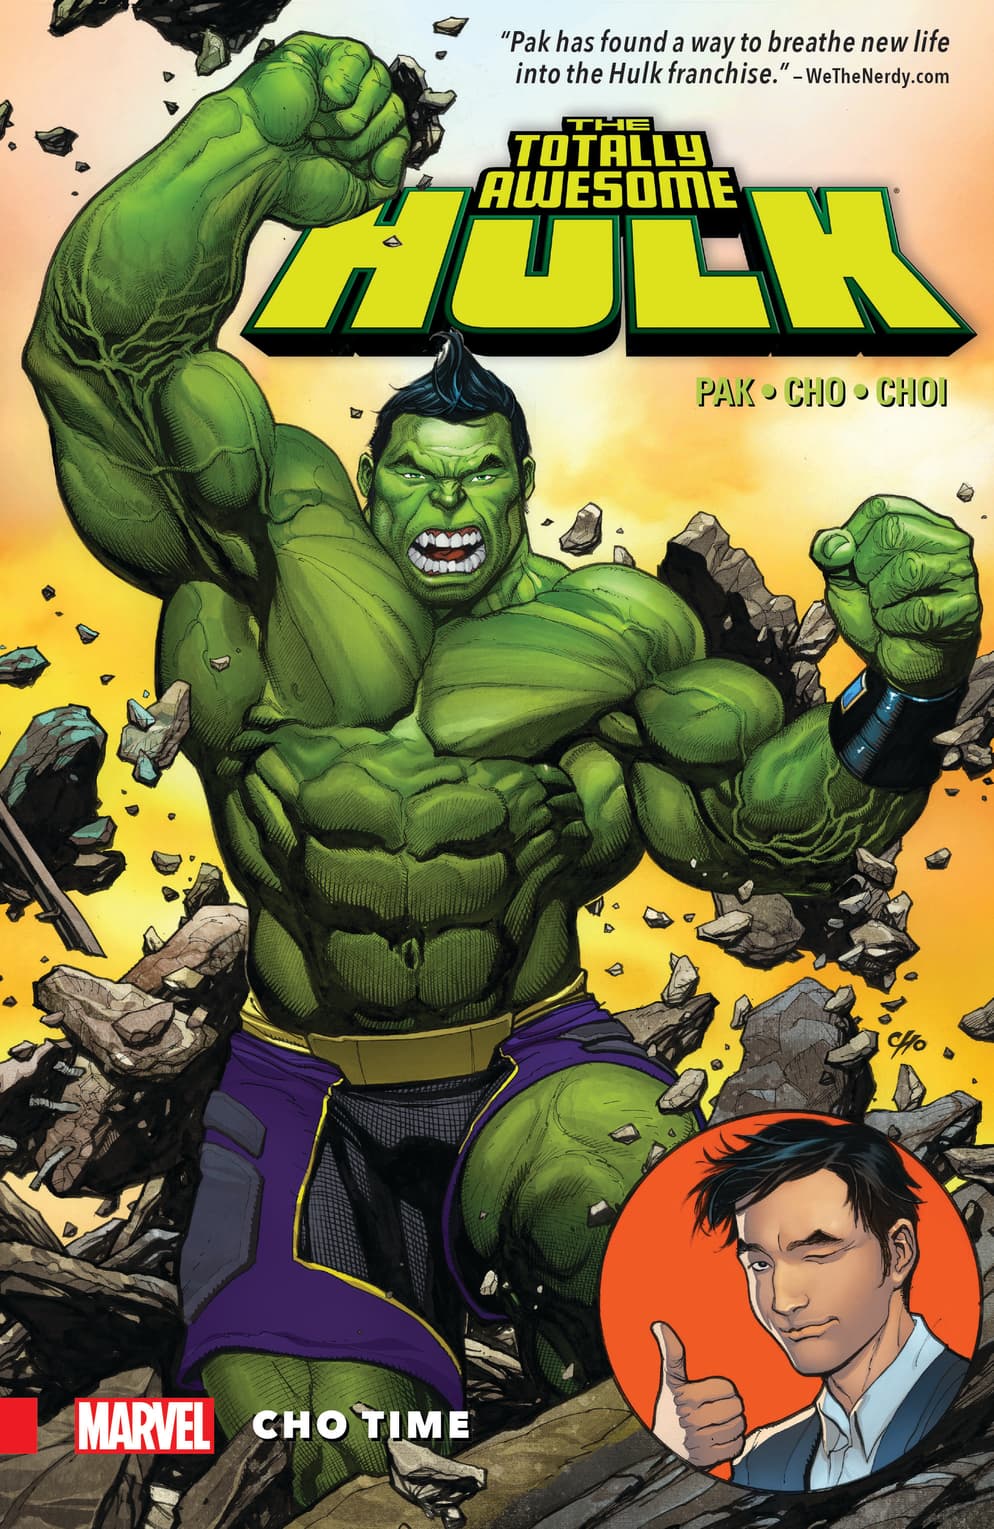 THE TOTALLY AWESOME HULK VOL. 1: CHO TIME cover by Frank Cho & David Curiel